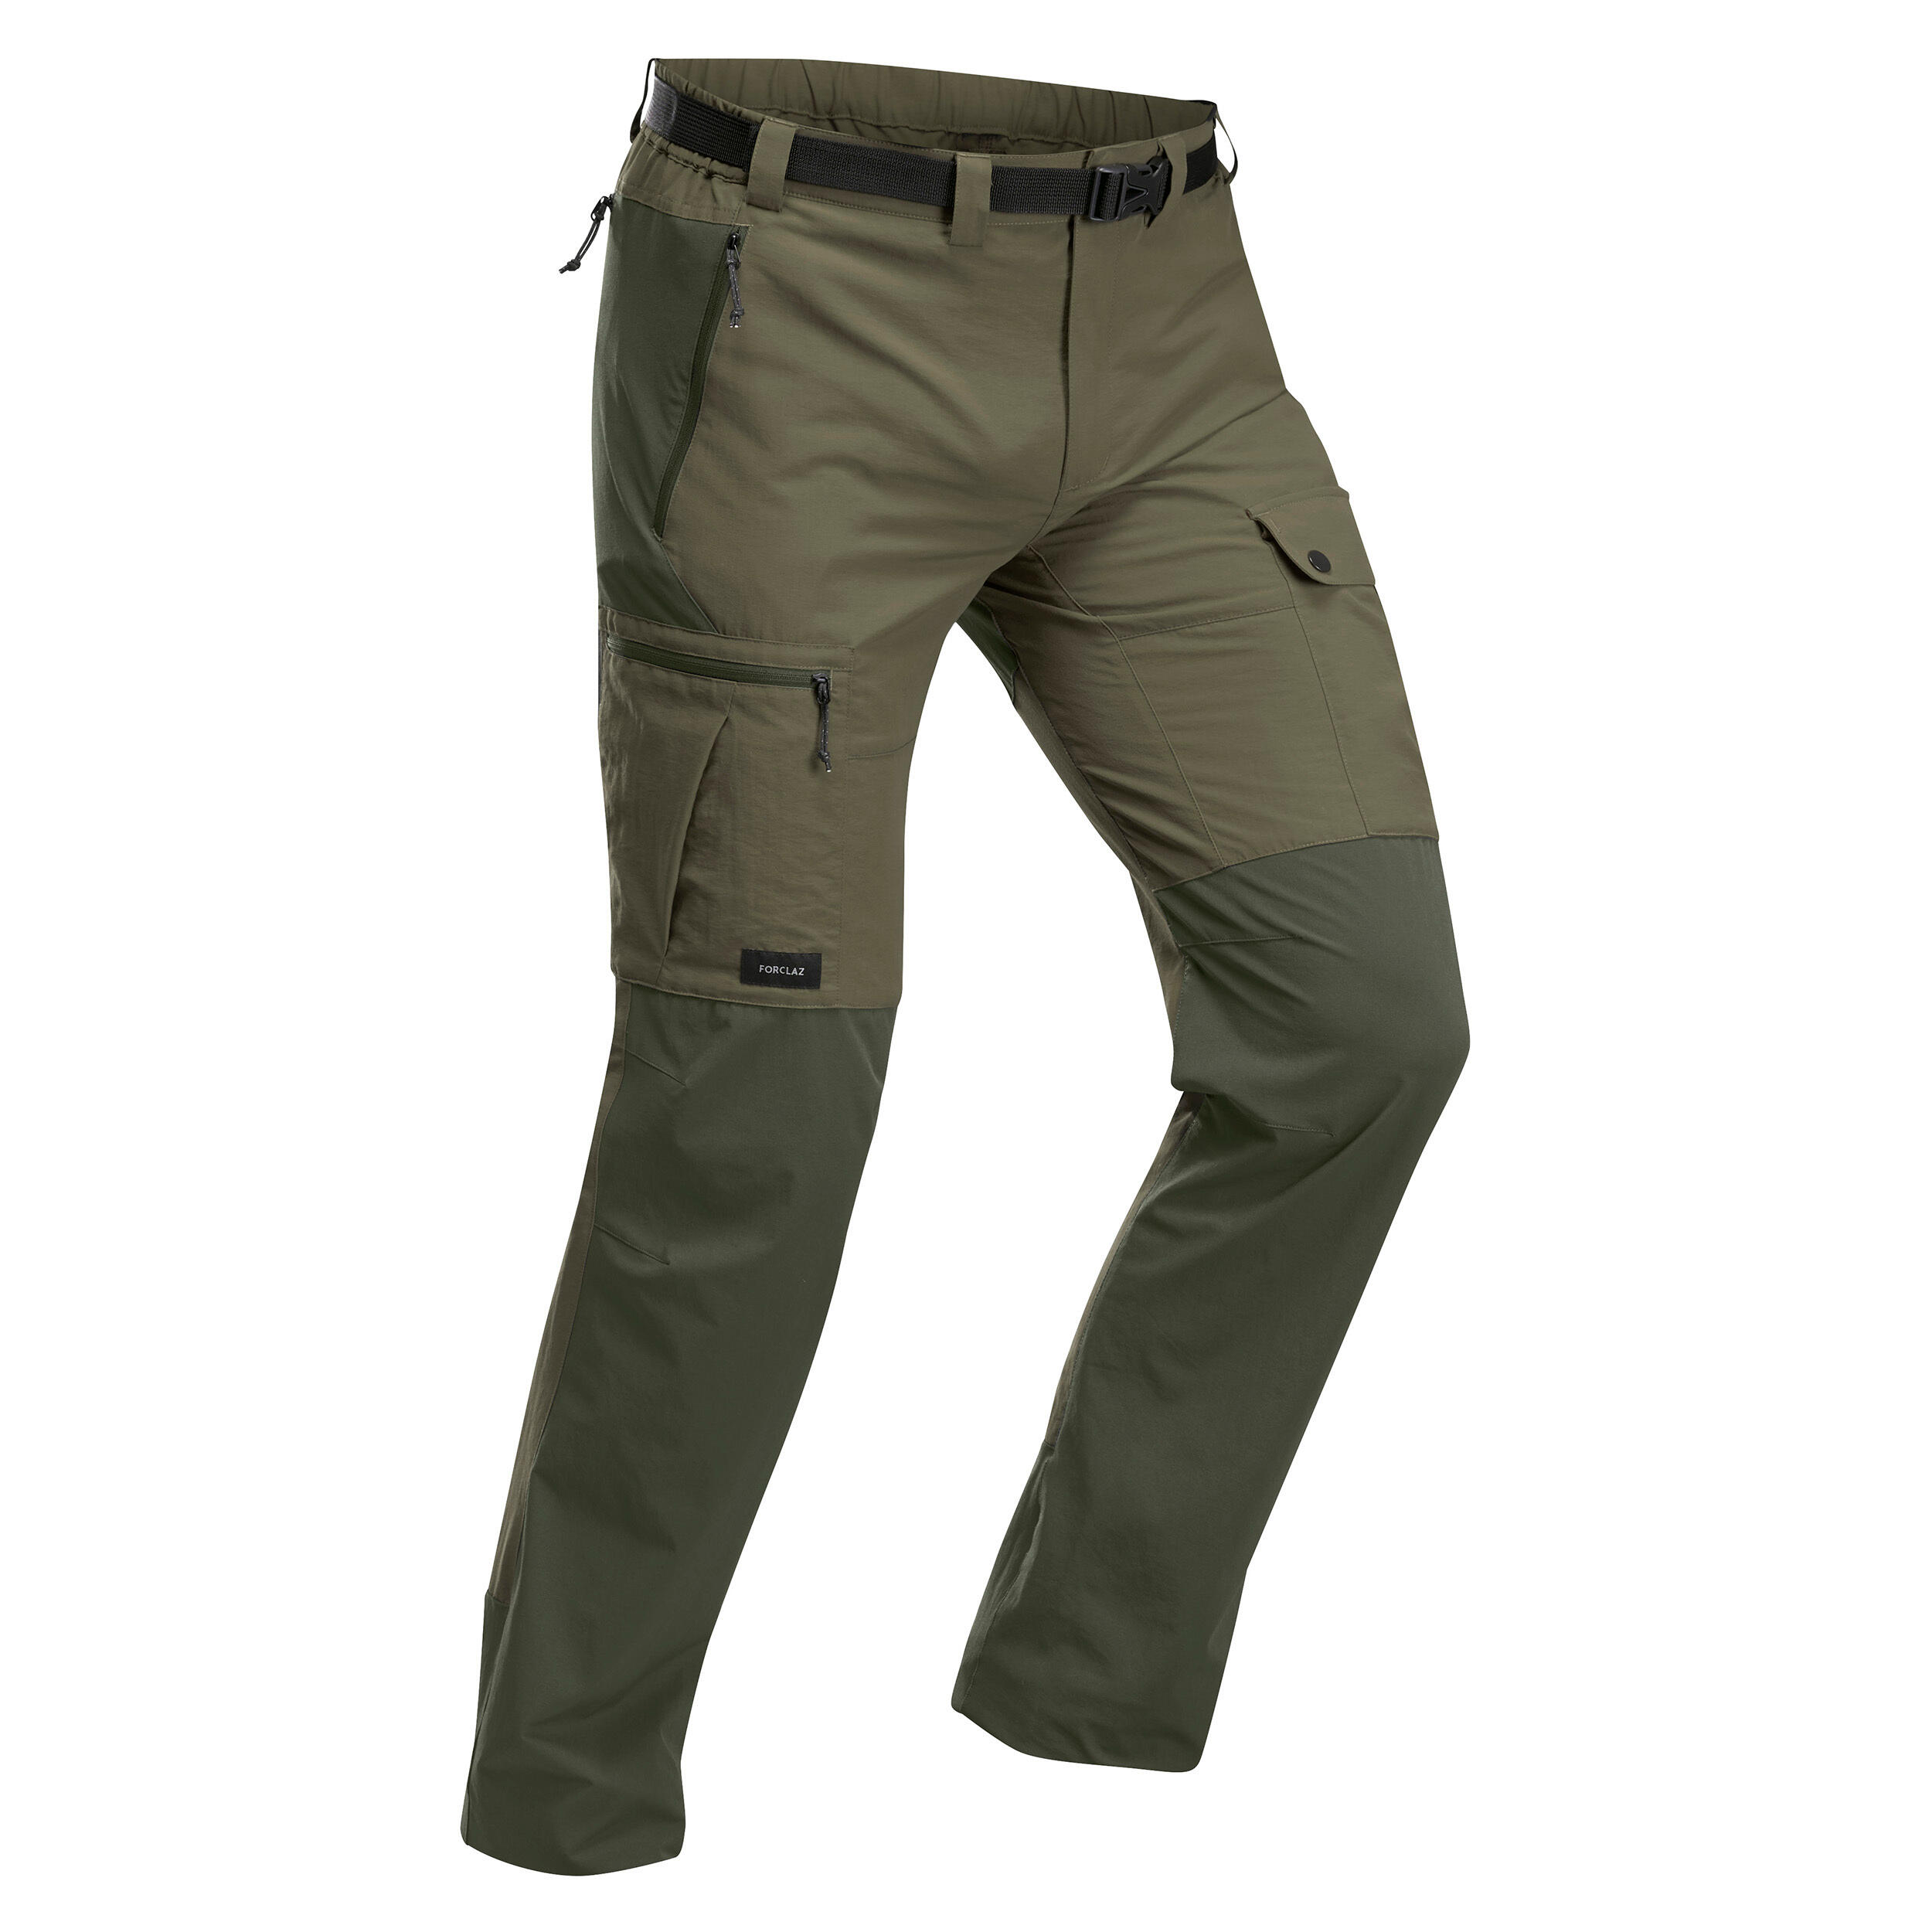 DURABLE CARGO Pants STEPPE 300 CAMOUFLAGE WOODLAND GREEN | Decathlon